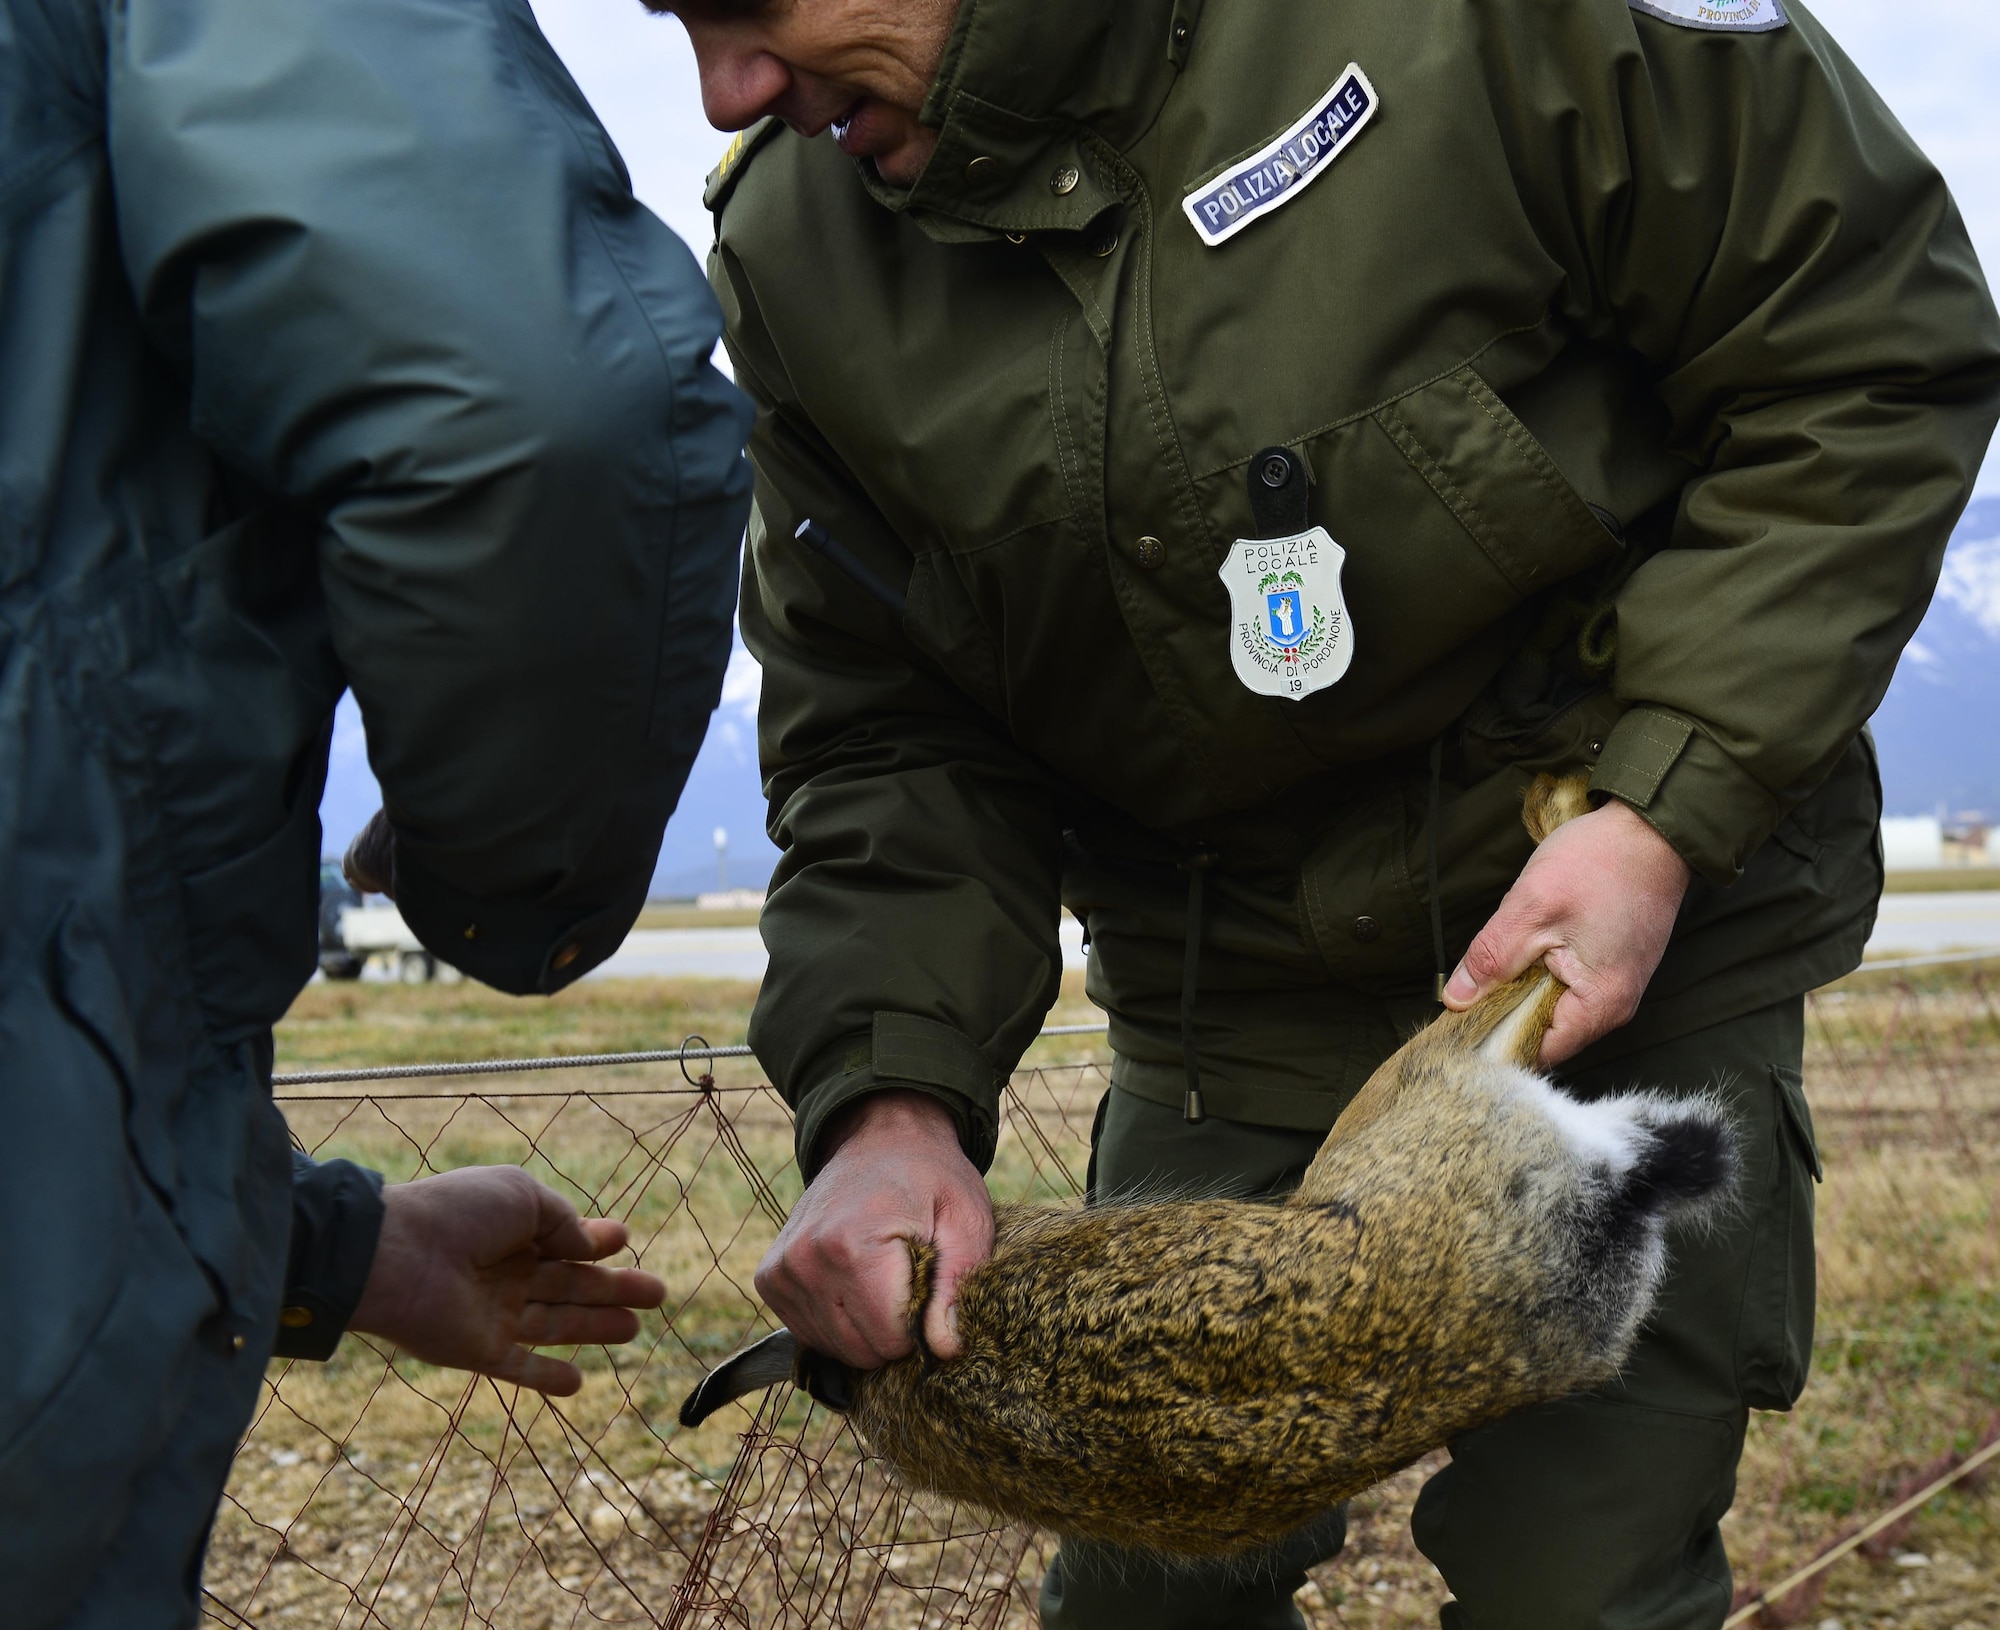 Two Italian State Forestry Corps members remove a rabbit from a net during a “Rabbit Roundup” event, Nov. 25, 2015, at Aviano Air Base, Italy. The Forestry Corps personnel, who are similar to game wardens or wildlife protectors, and about 300 U.S. and Italian volunteers relocated 26 rabbits to a safe area off base. (U.S. Air Force photo/Airman 1st Class Cary Smith)